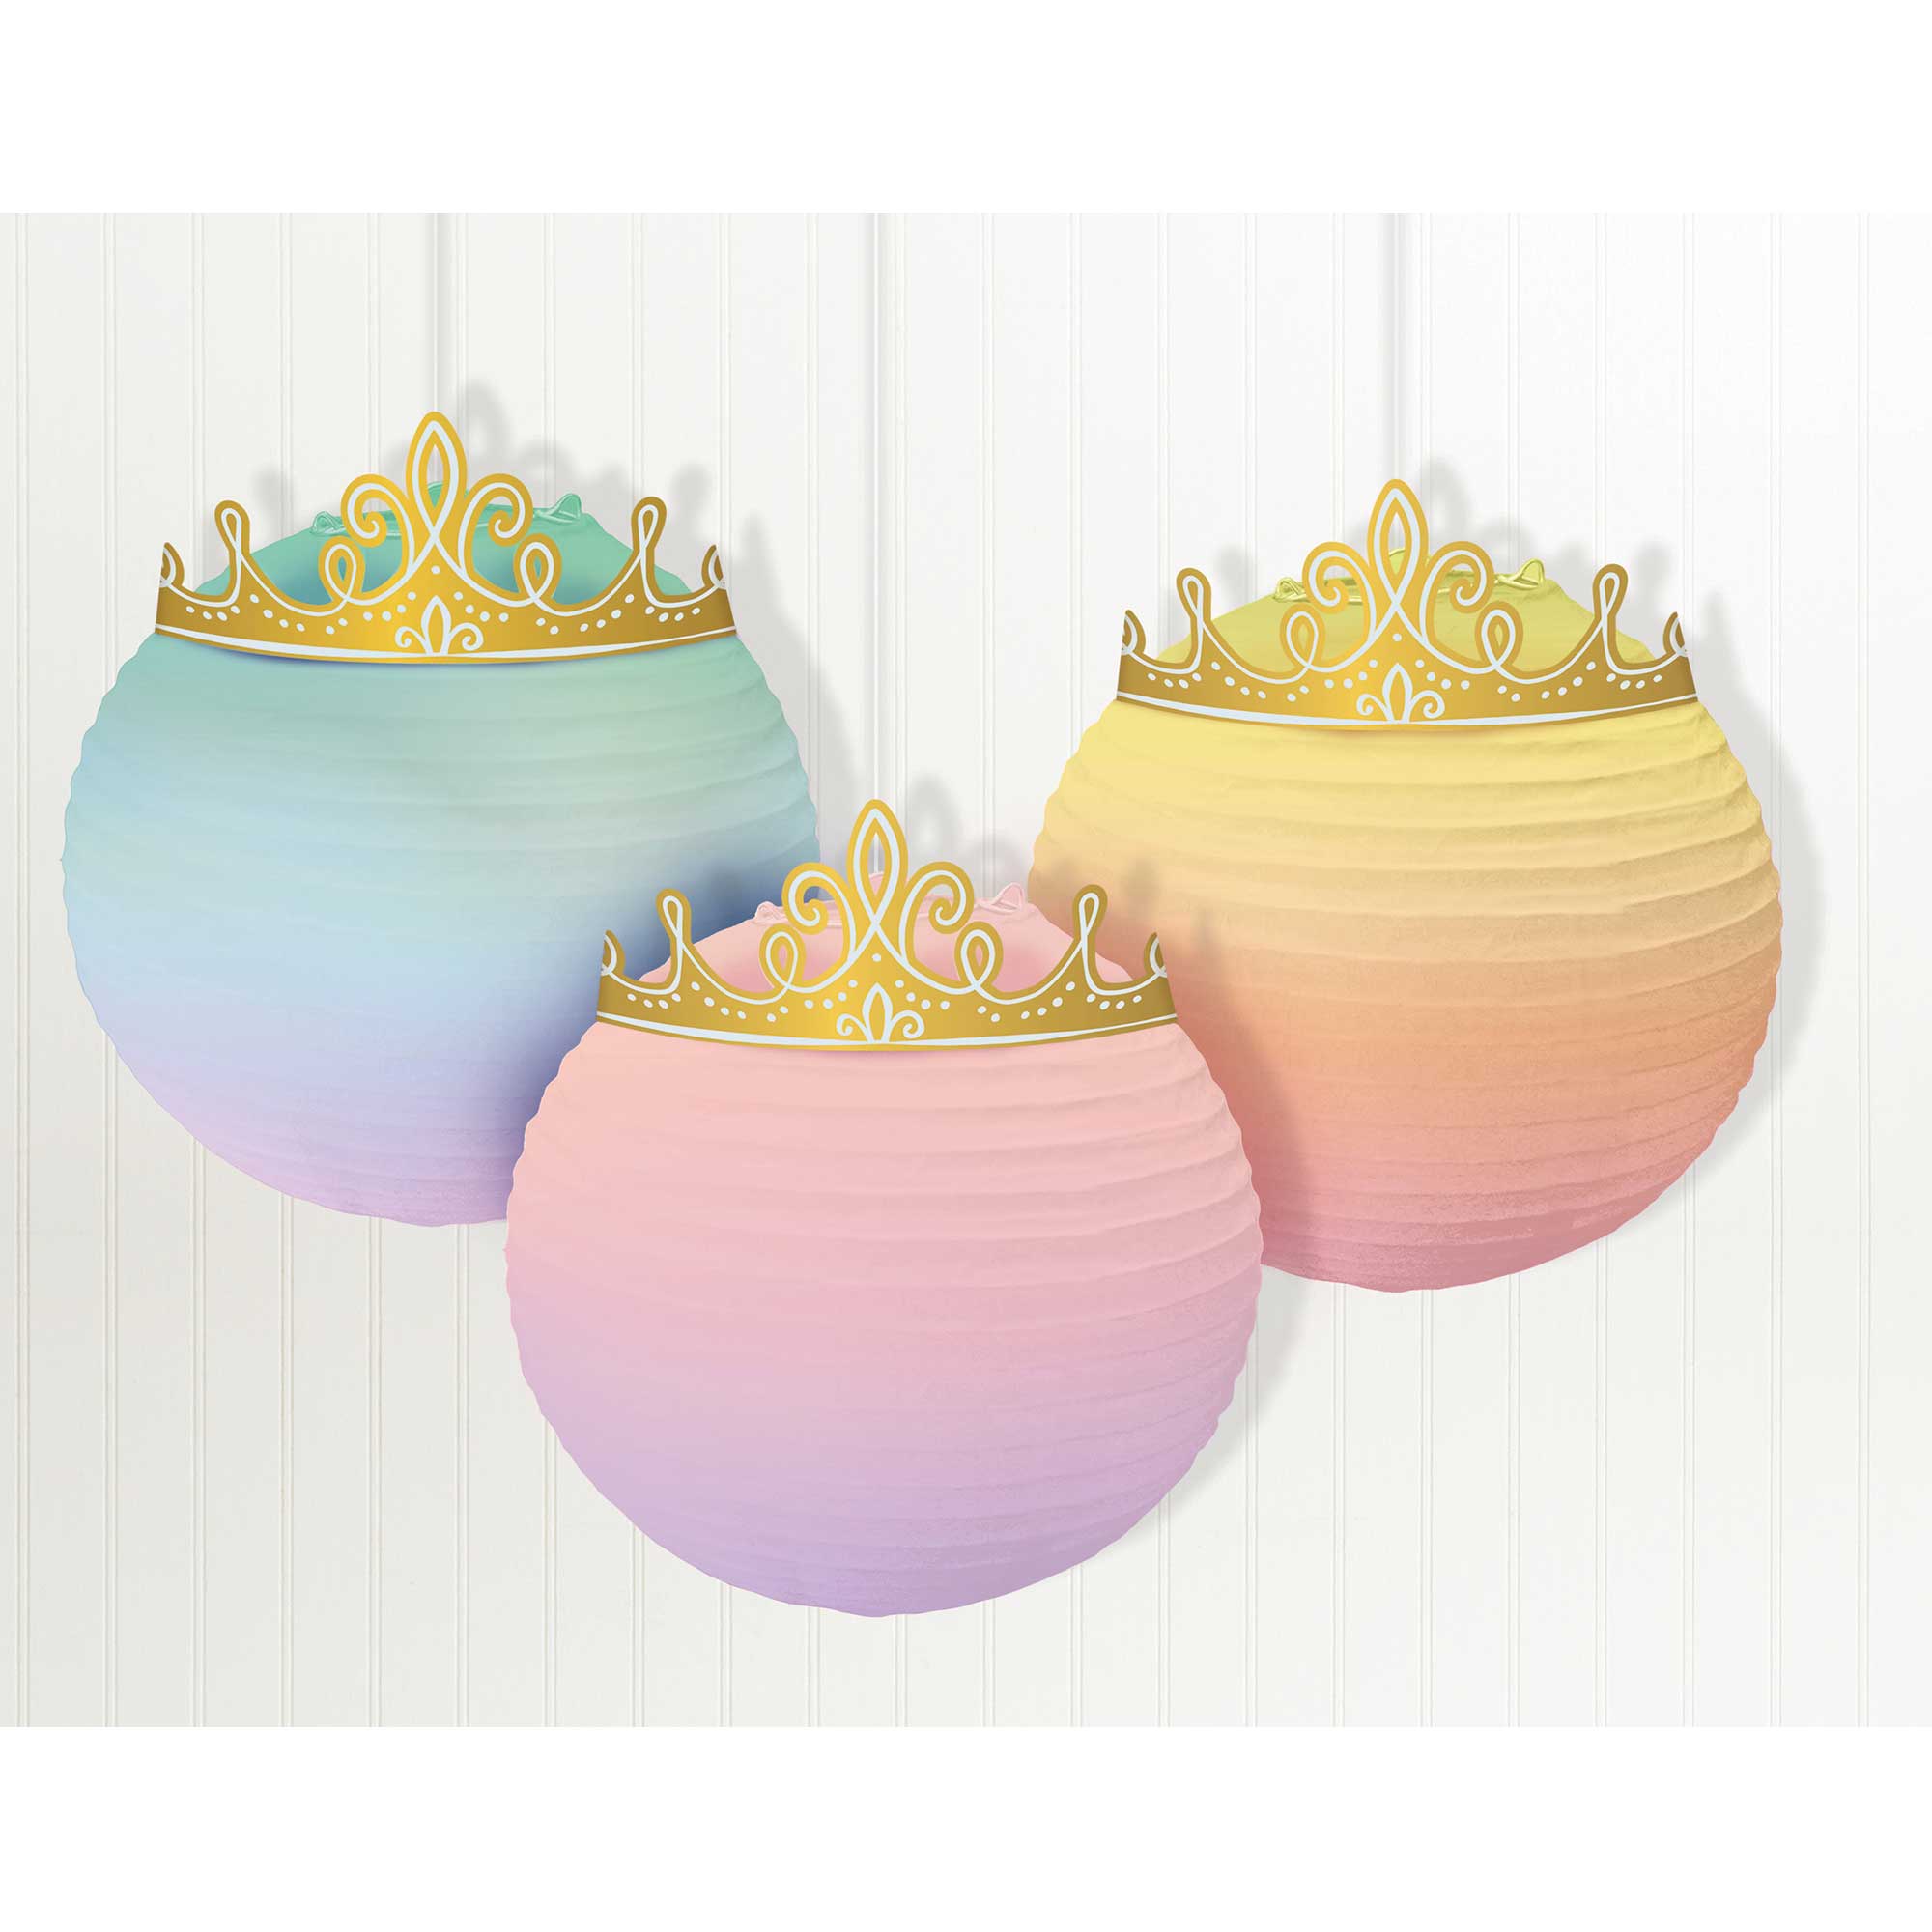 Disney Princess Once Upon A Time Paper Lanterns and Gold Crowns - 31x24cm 3 Pack Default Title